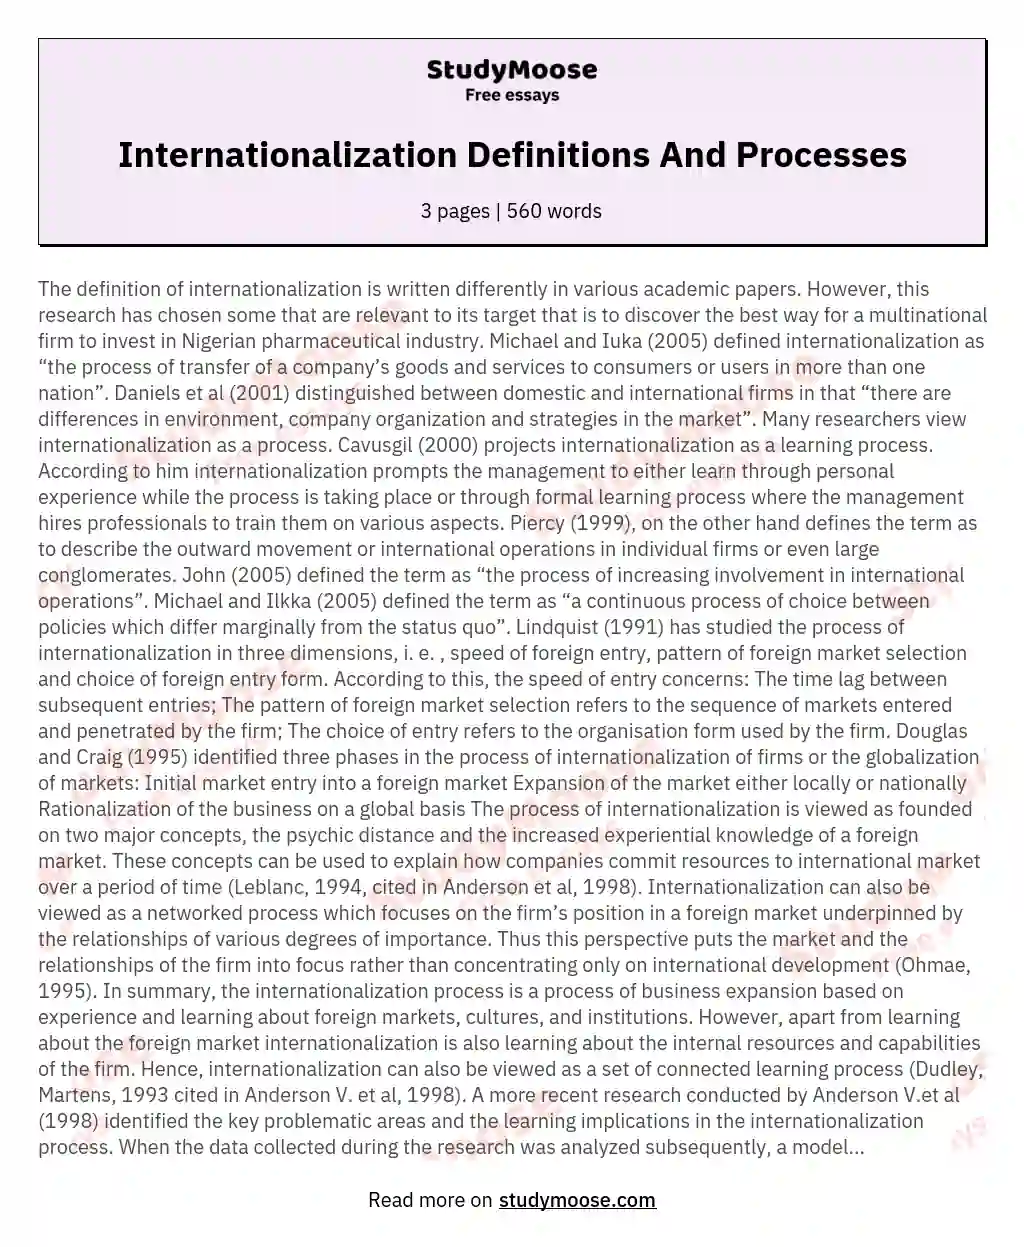 Internationalization Definitions And Processes essay